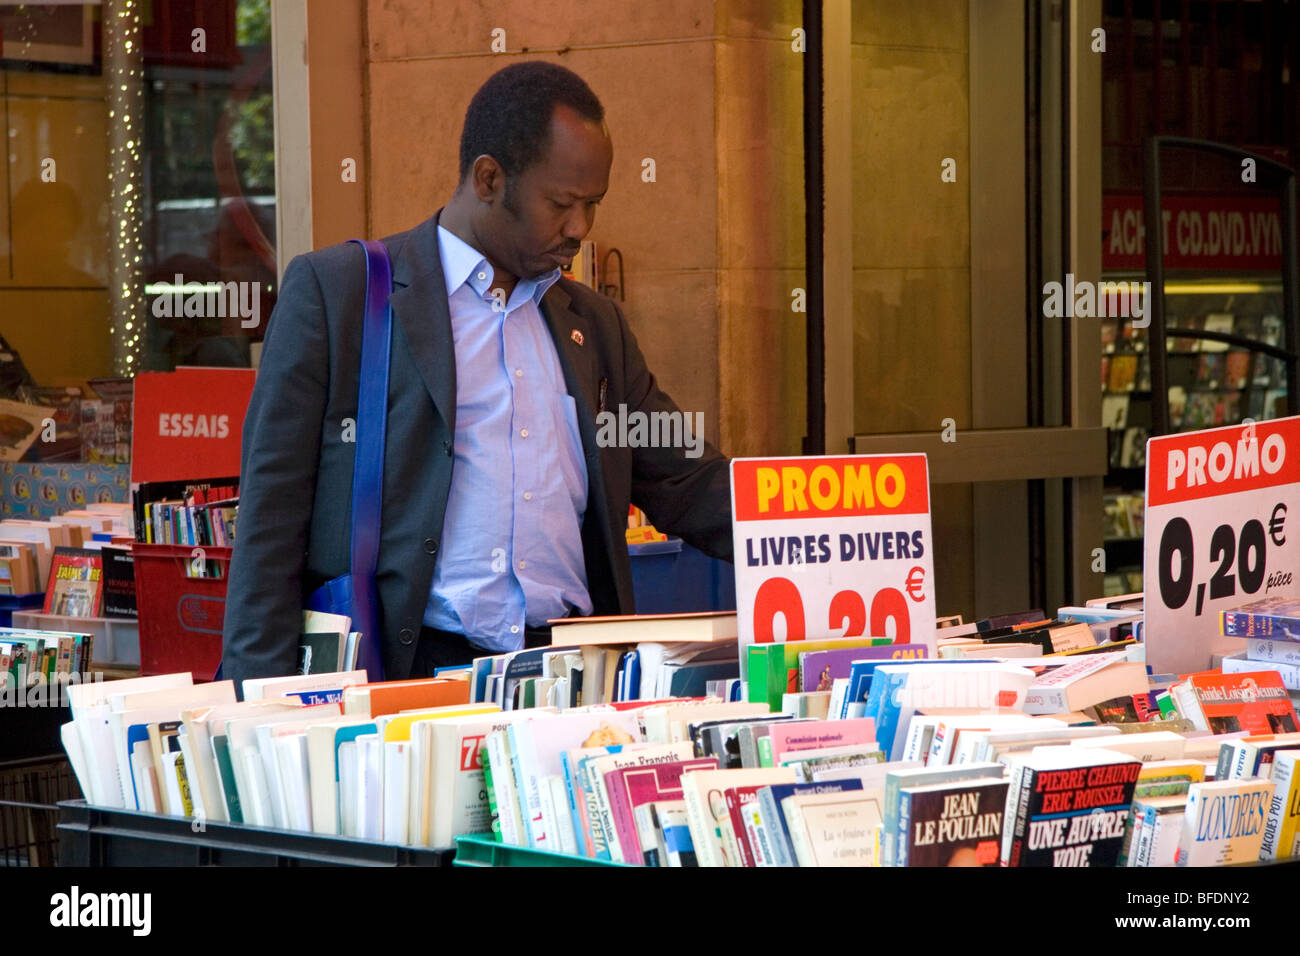 Customer shopping at a bookstore along Boulevard Saint-Michel in the Latin Quarter of Paris, France. Stock Photo